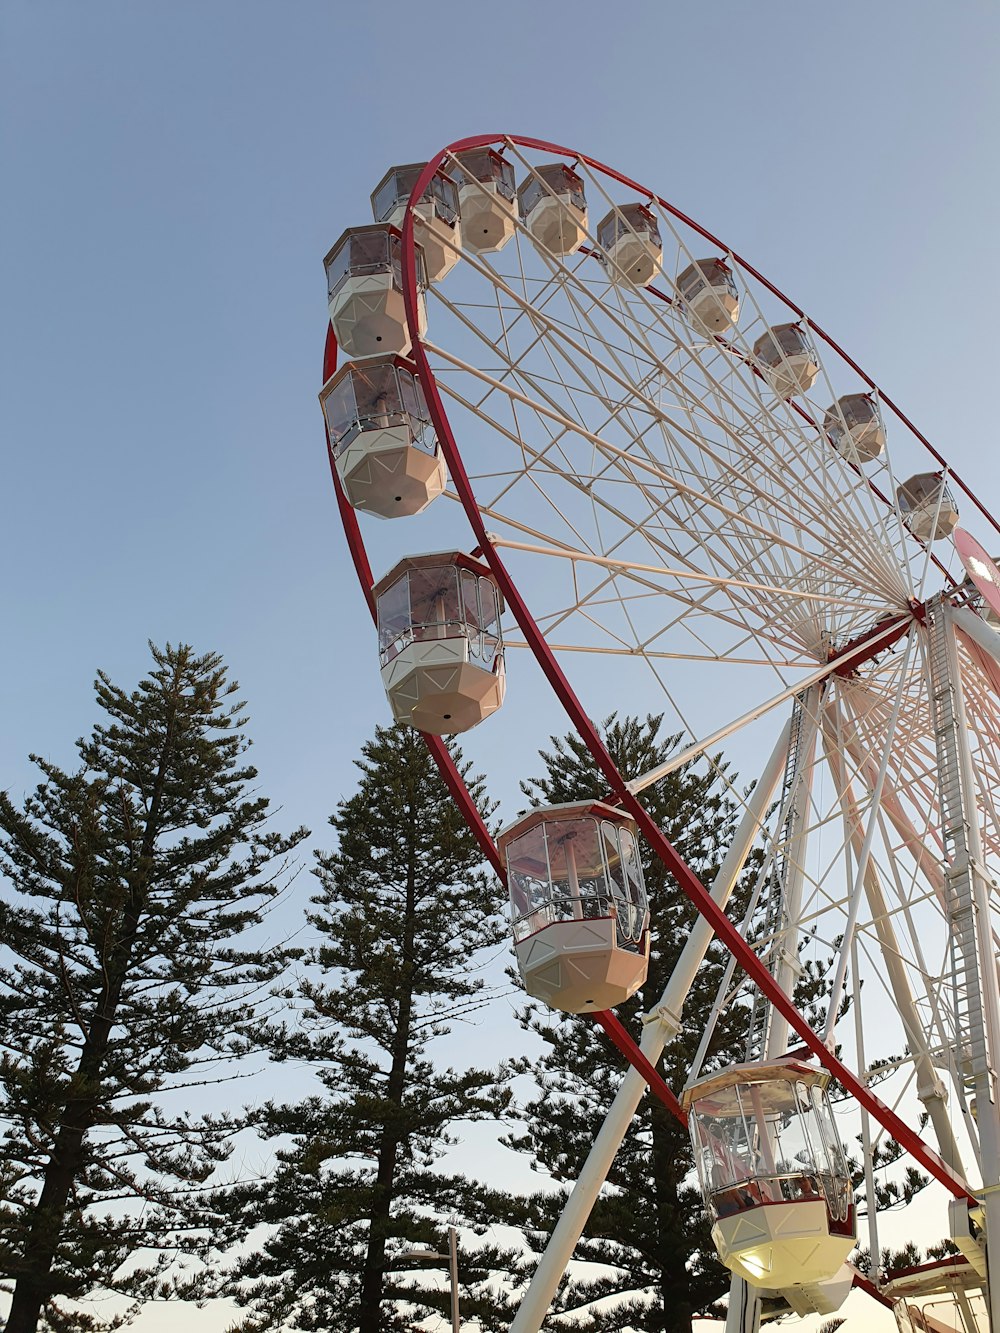 a ferris wheel in a park with trees in the background